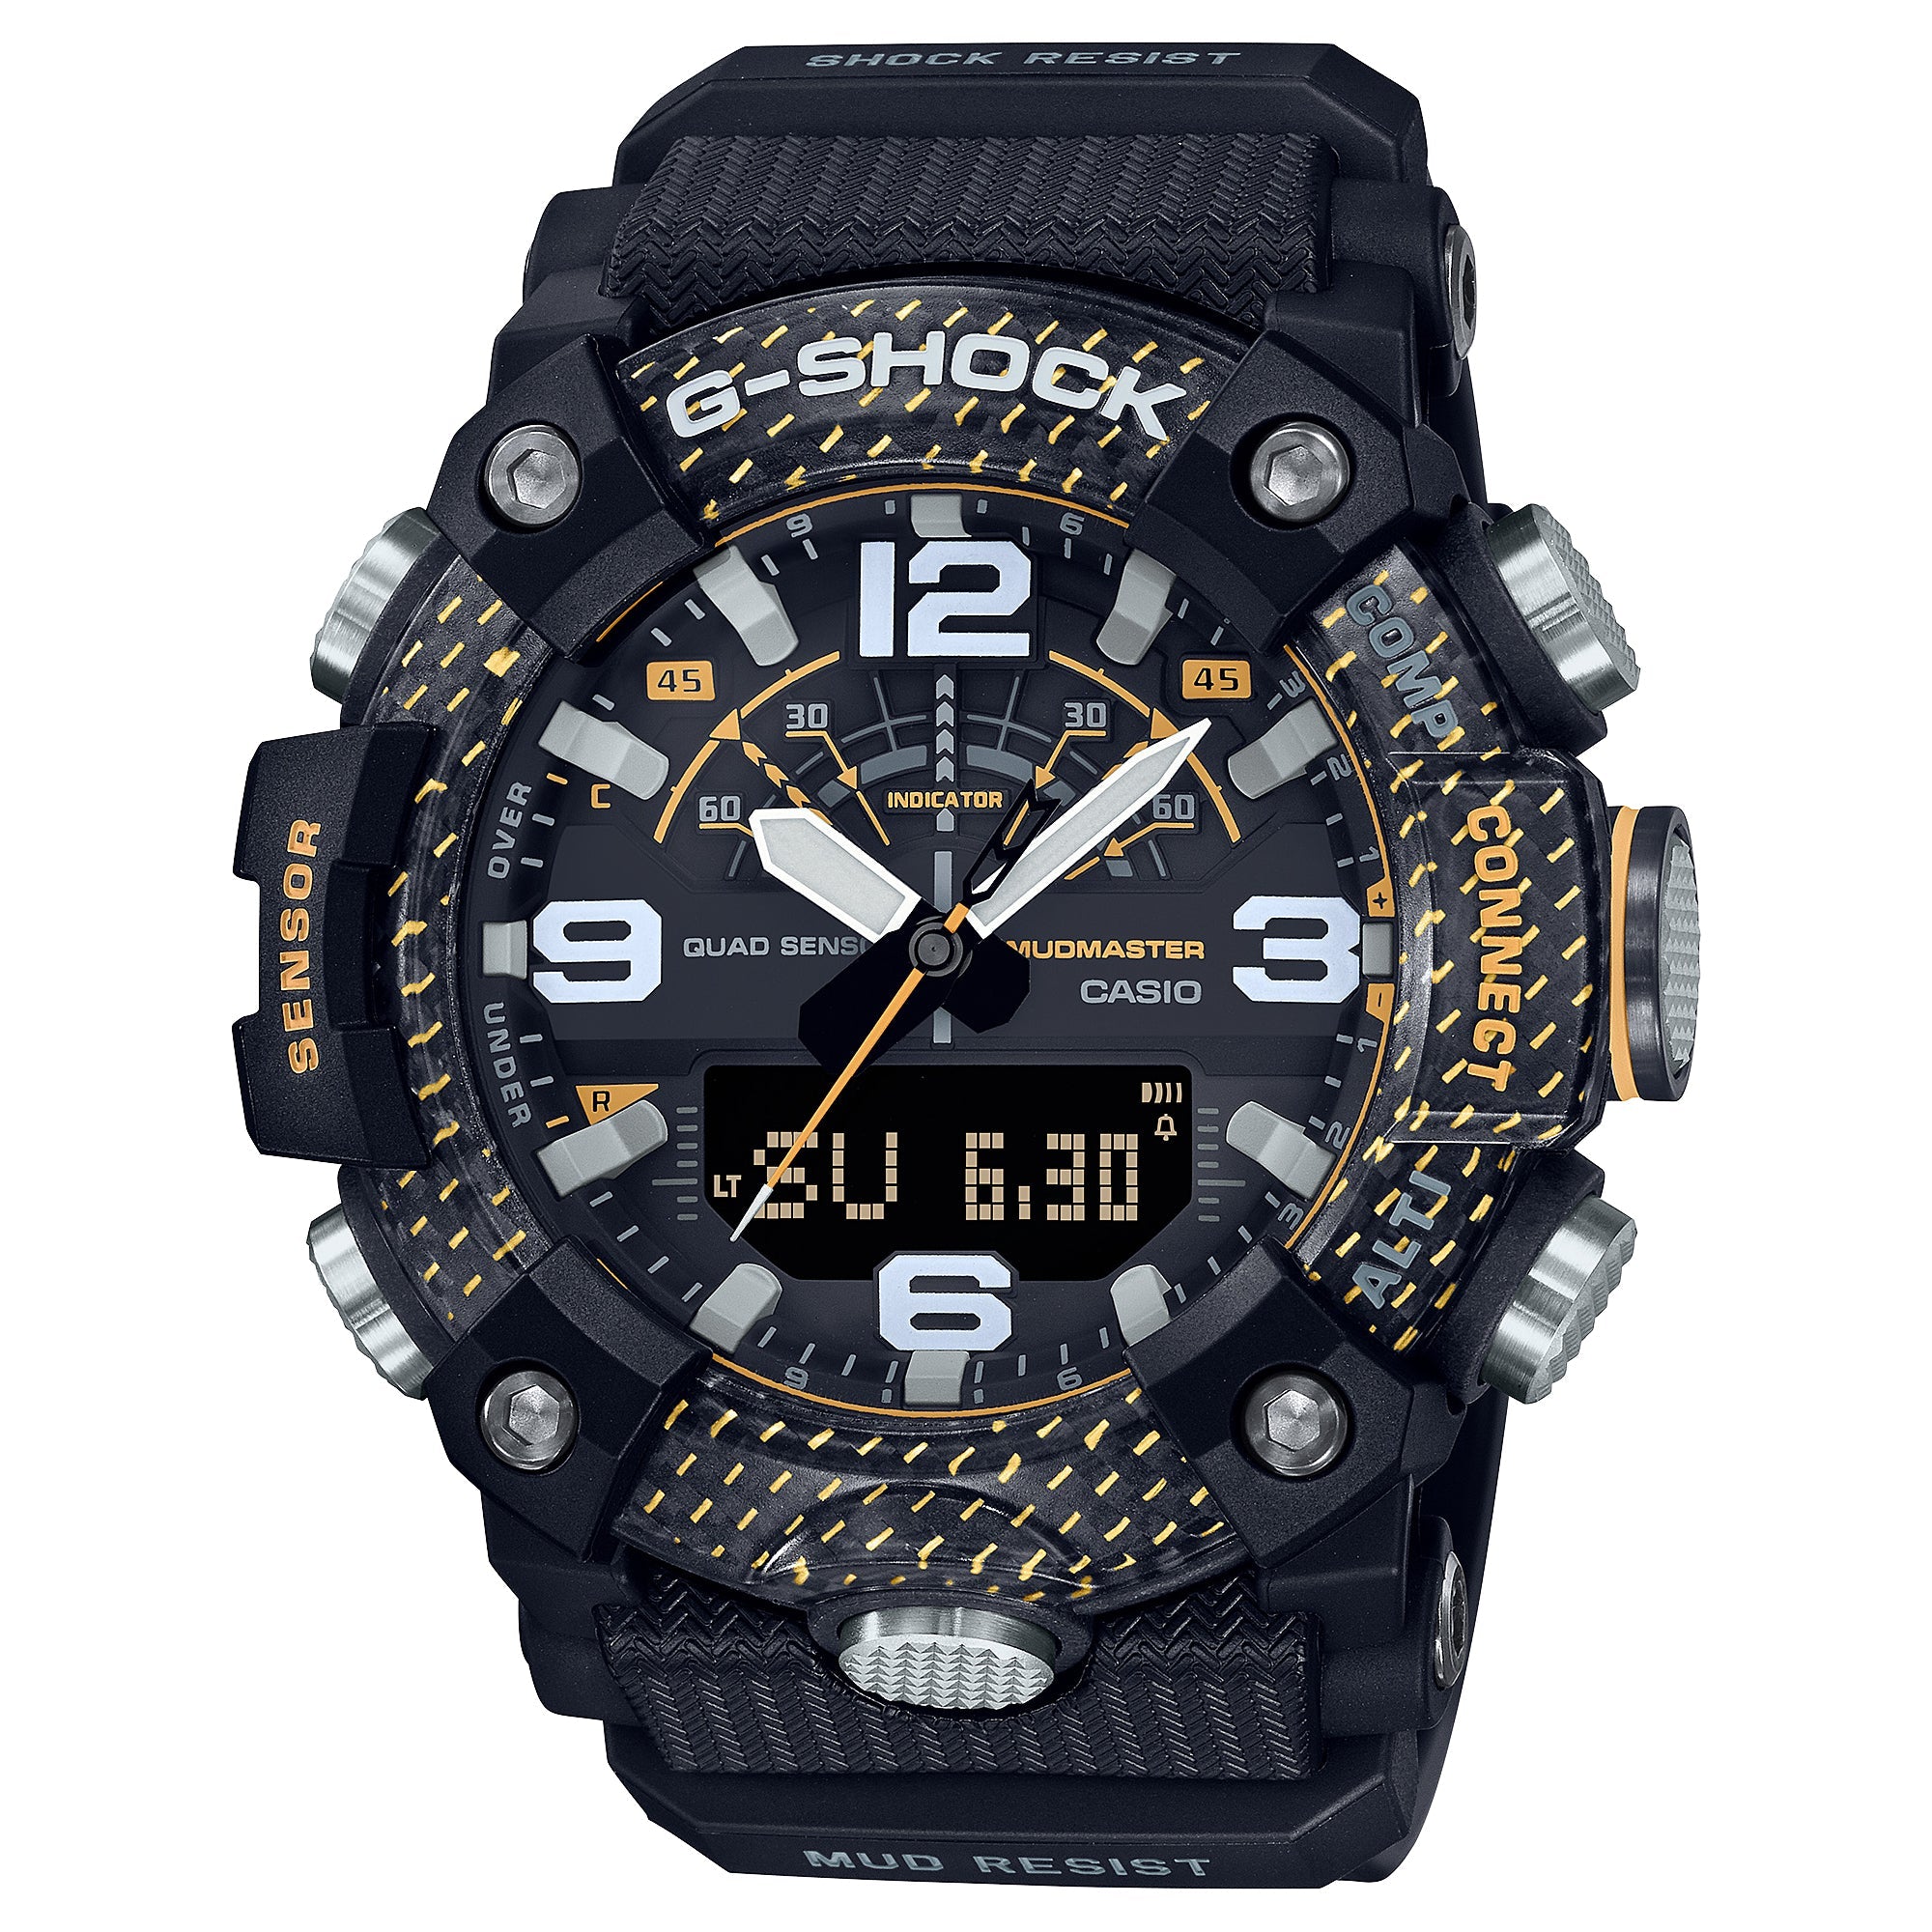 Casio G-Shock Master of G Mudmaster Carbon Core Guard Structure Black Resin Band Watch GGB100Y-1A GG-B100Y-1A Watchspree